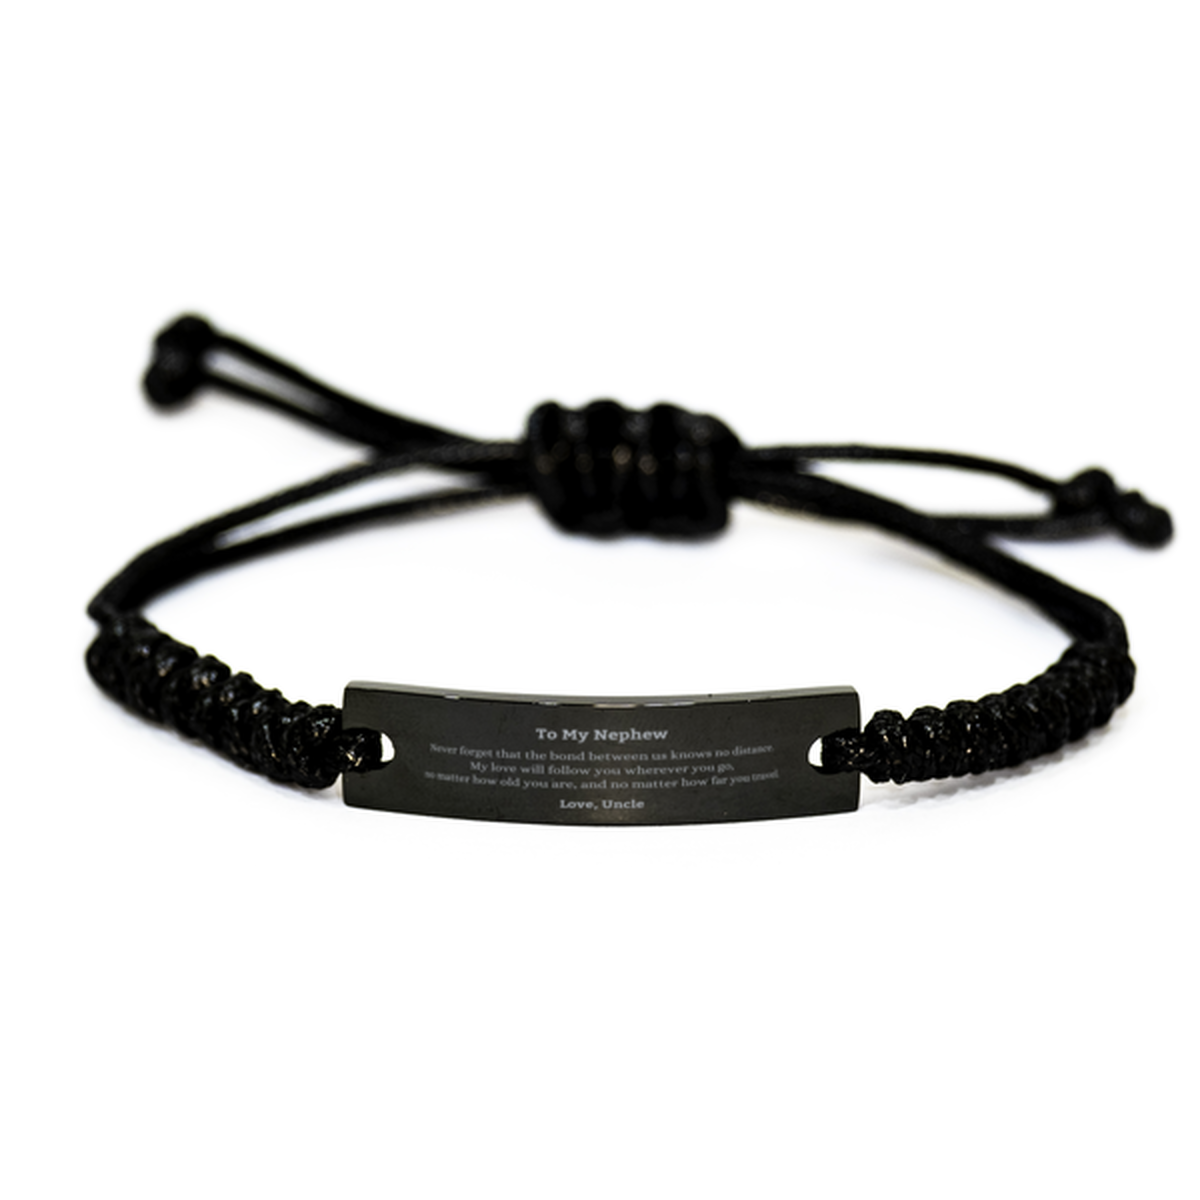 Nephew Birthday Gifts from Uncle, Adjustable Black Rope Bracelet for Nephew Christmas Graduation Unique Gifts Nephew Never forget that the bond between us knows no distance. Love, Uncle